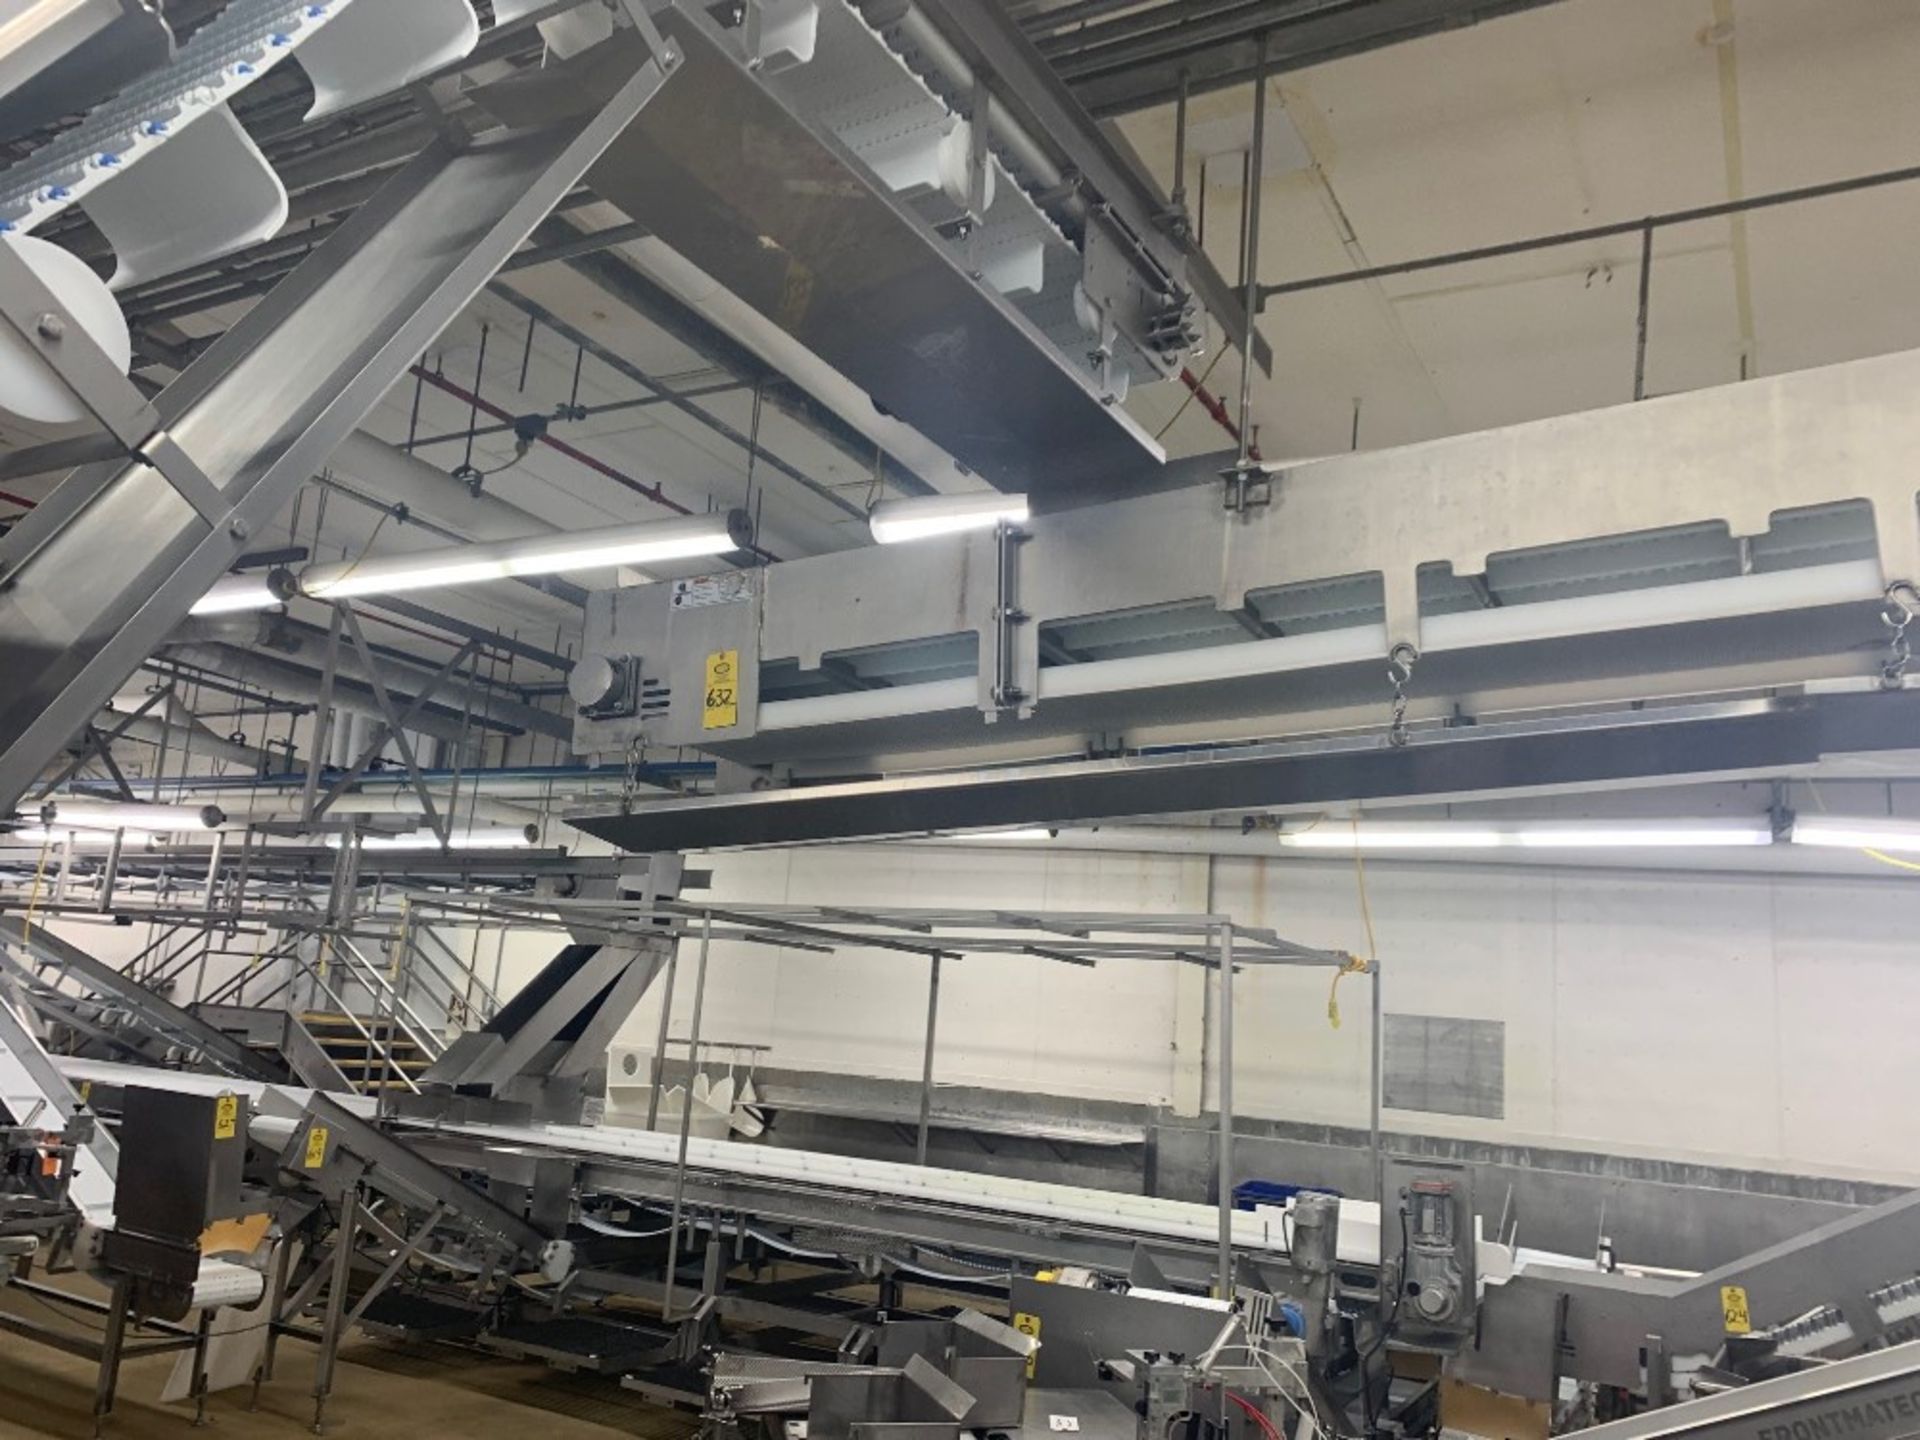 Stainless Steel Suspended Conveyor, 18" W X 25' L, stainless steel motor, 230/460 volts: Required